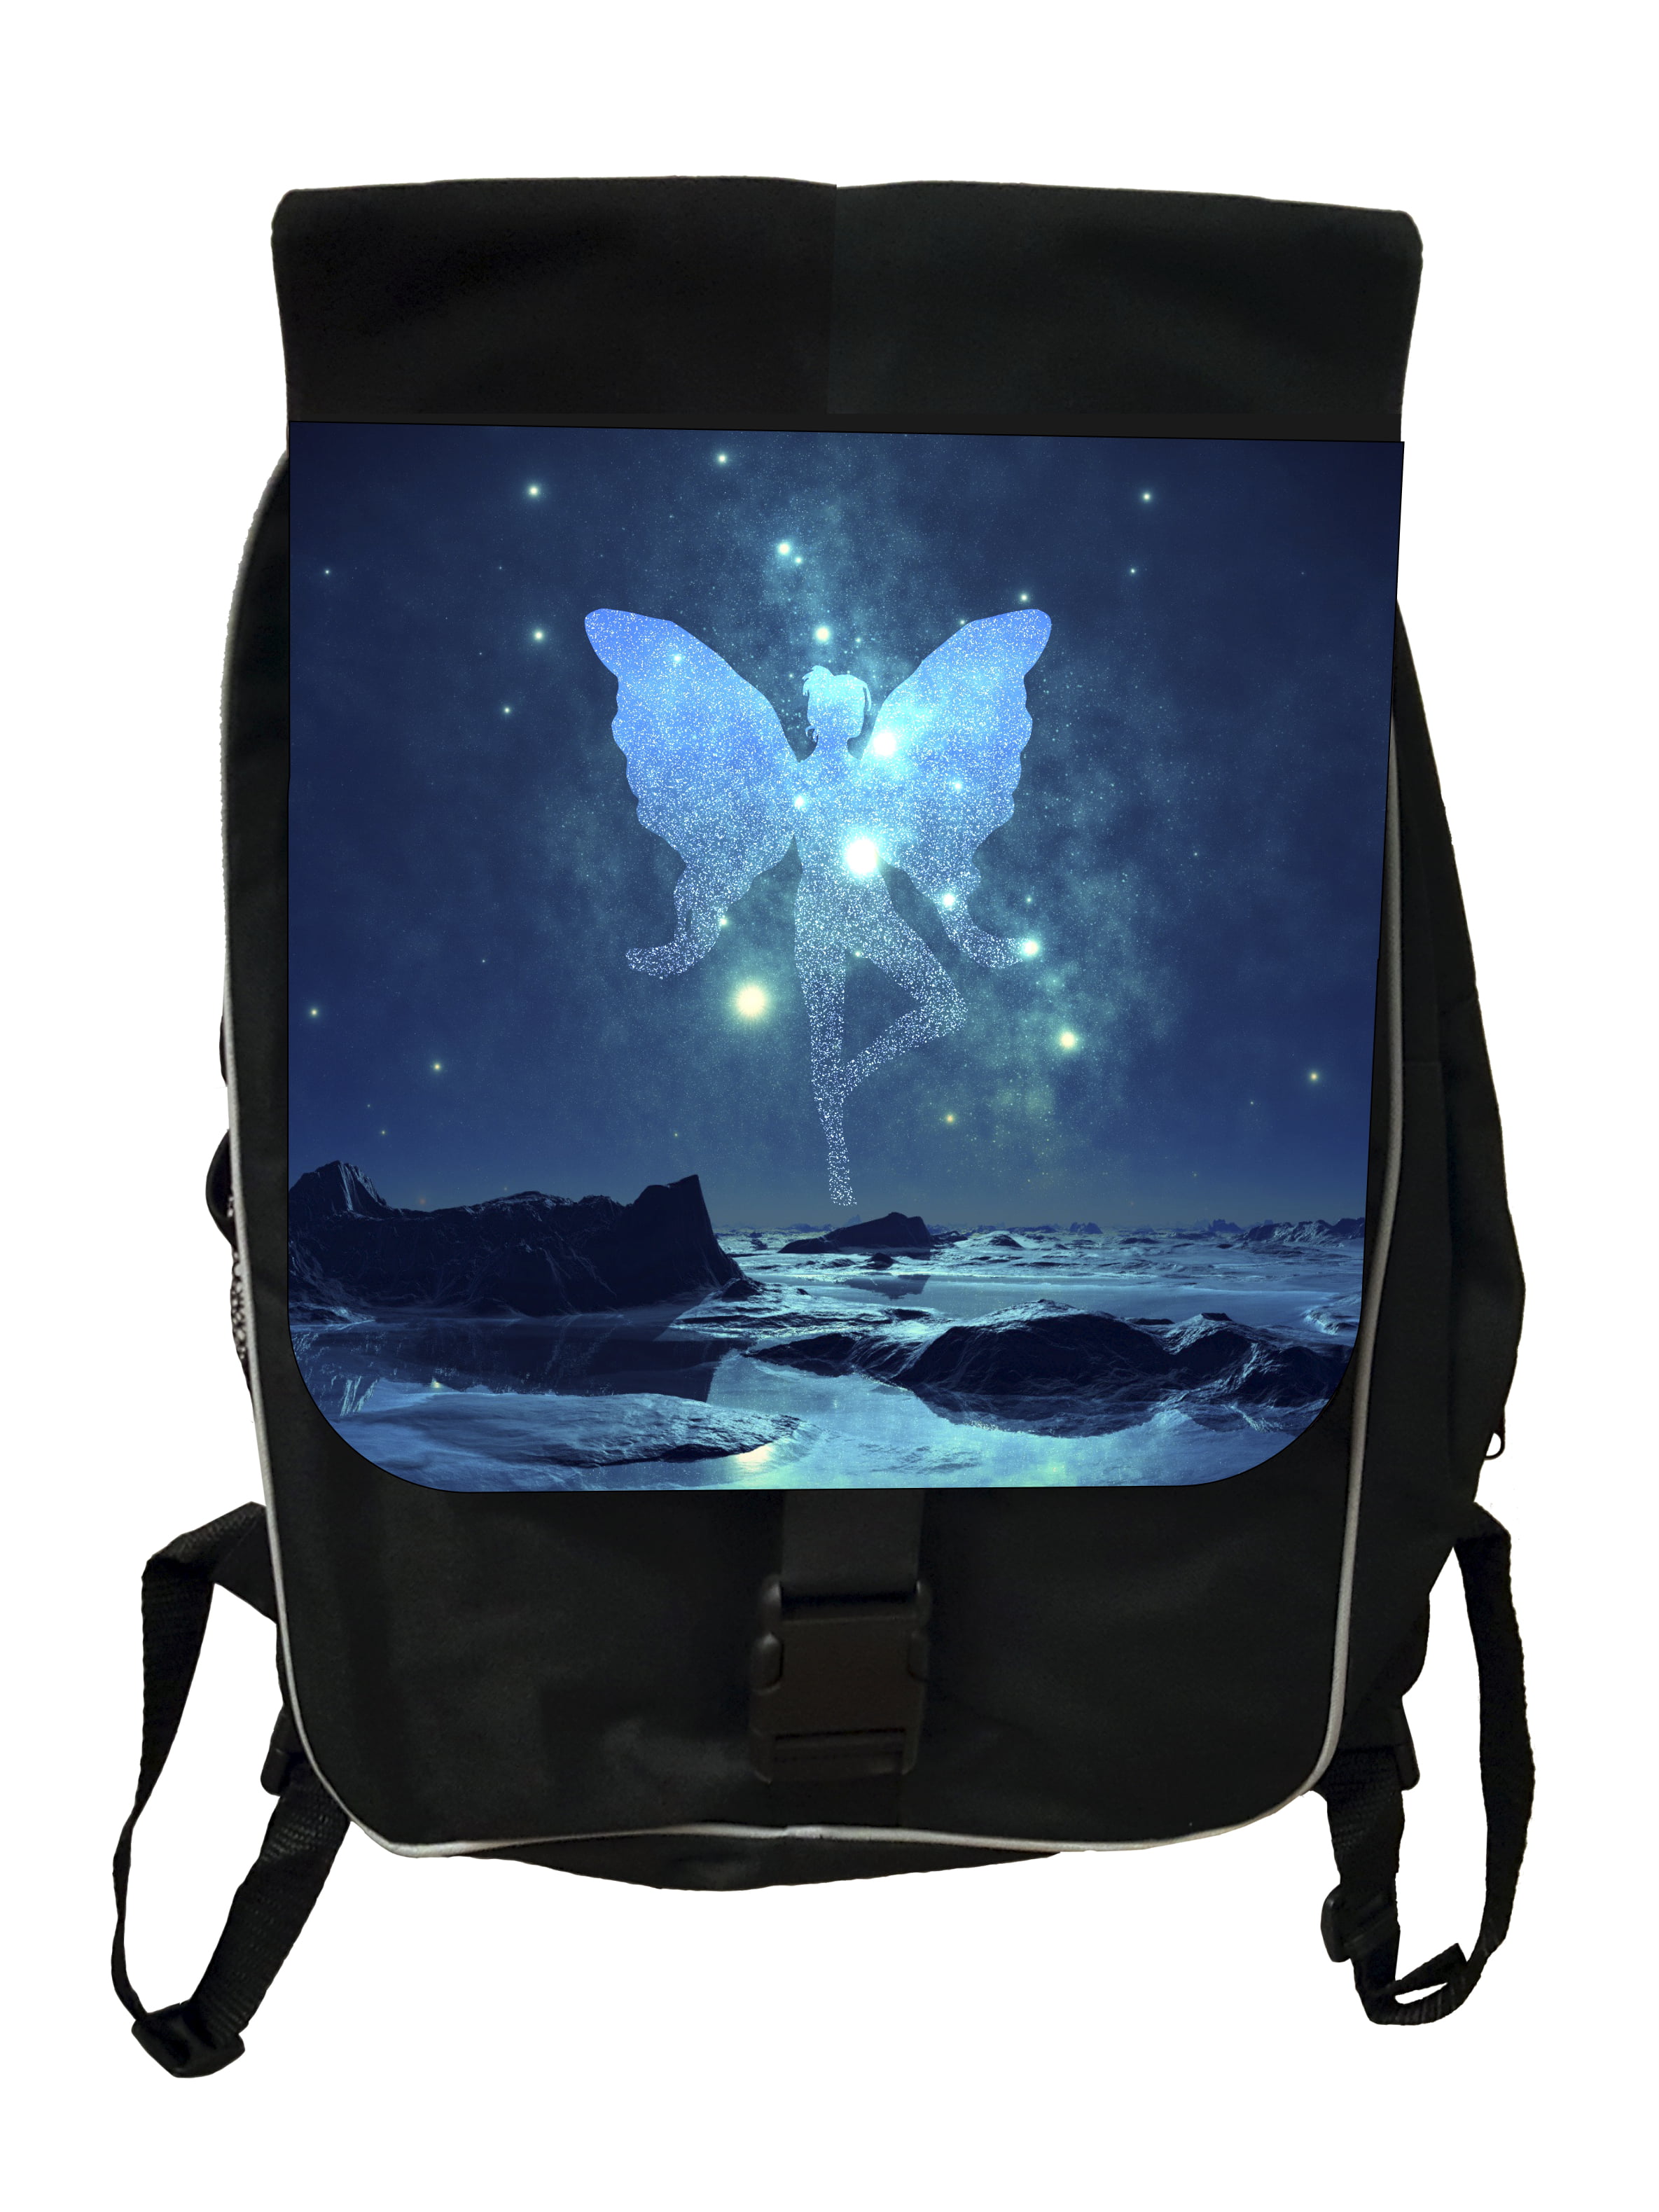 Girls Black Laptop Shoulder Messenger Bag and Small Wire Accessories Case Set Blue Galactic Fairy 